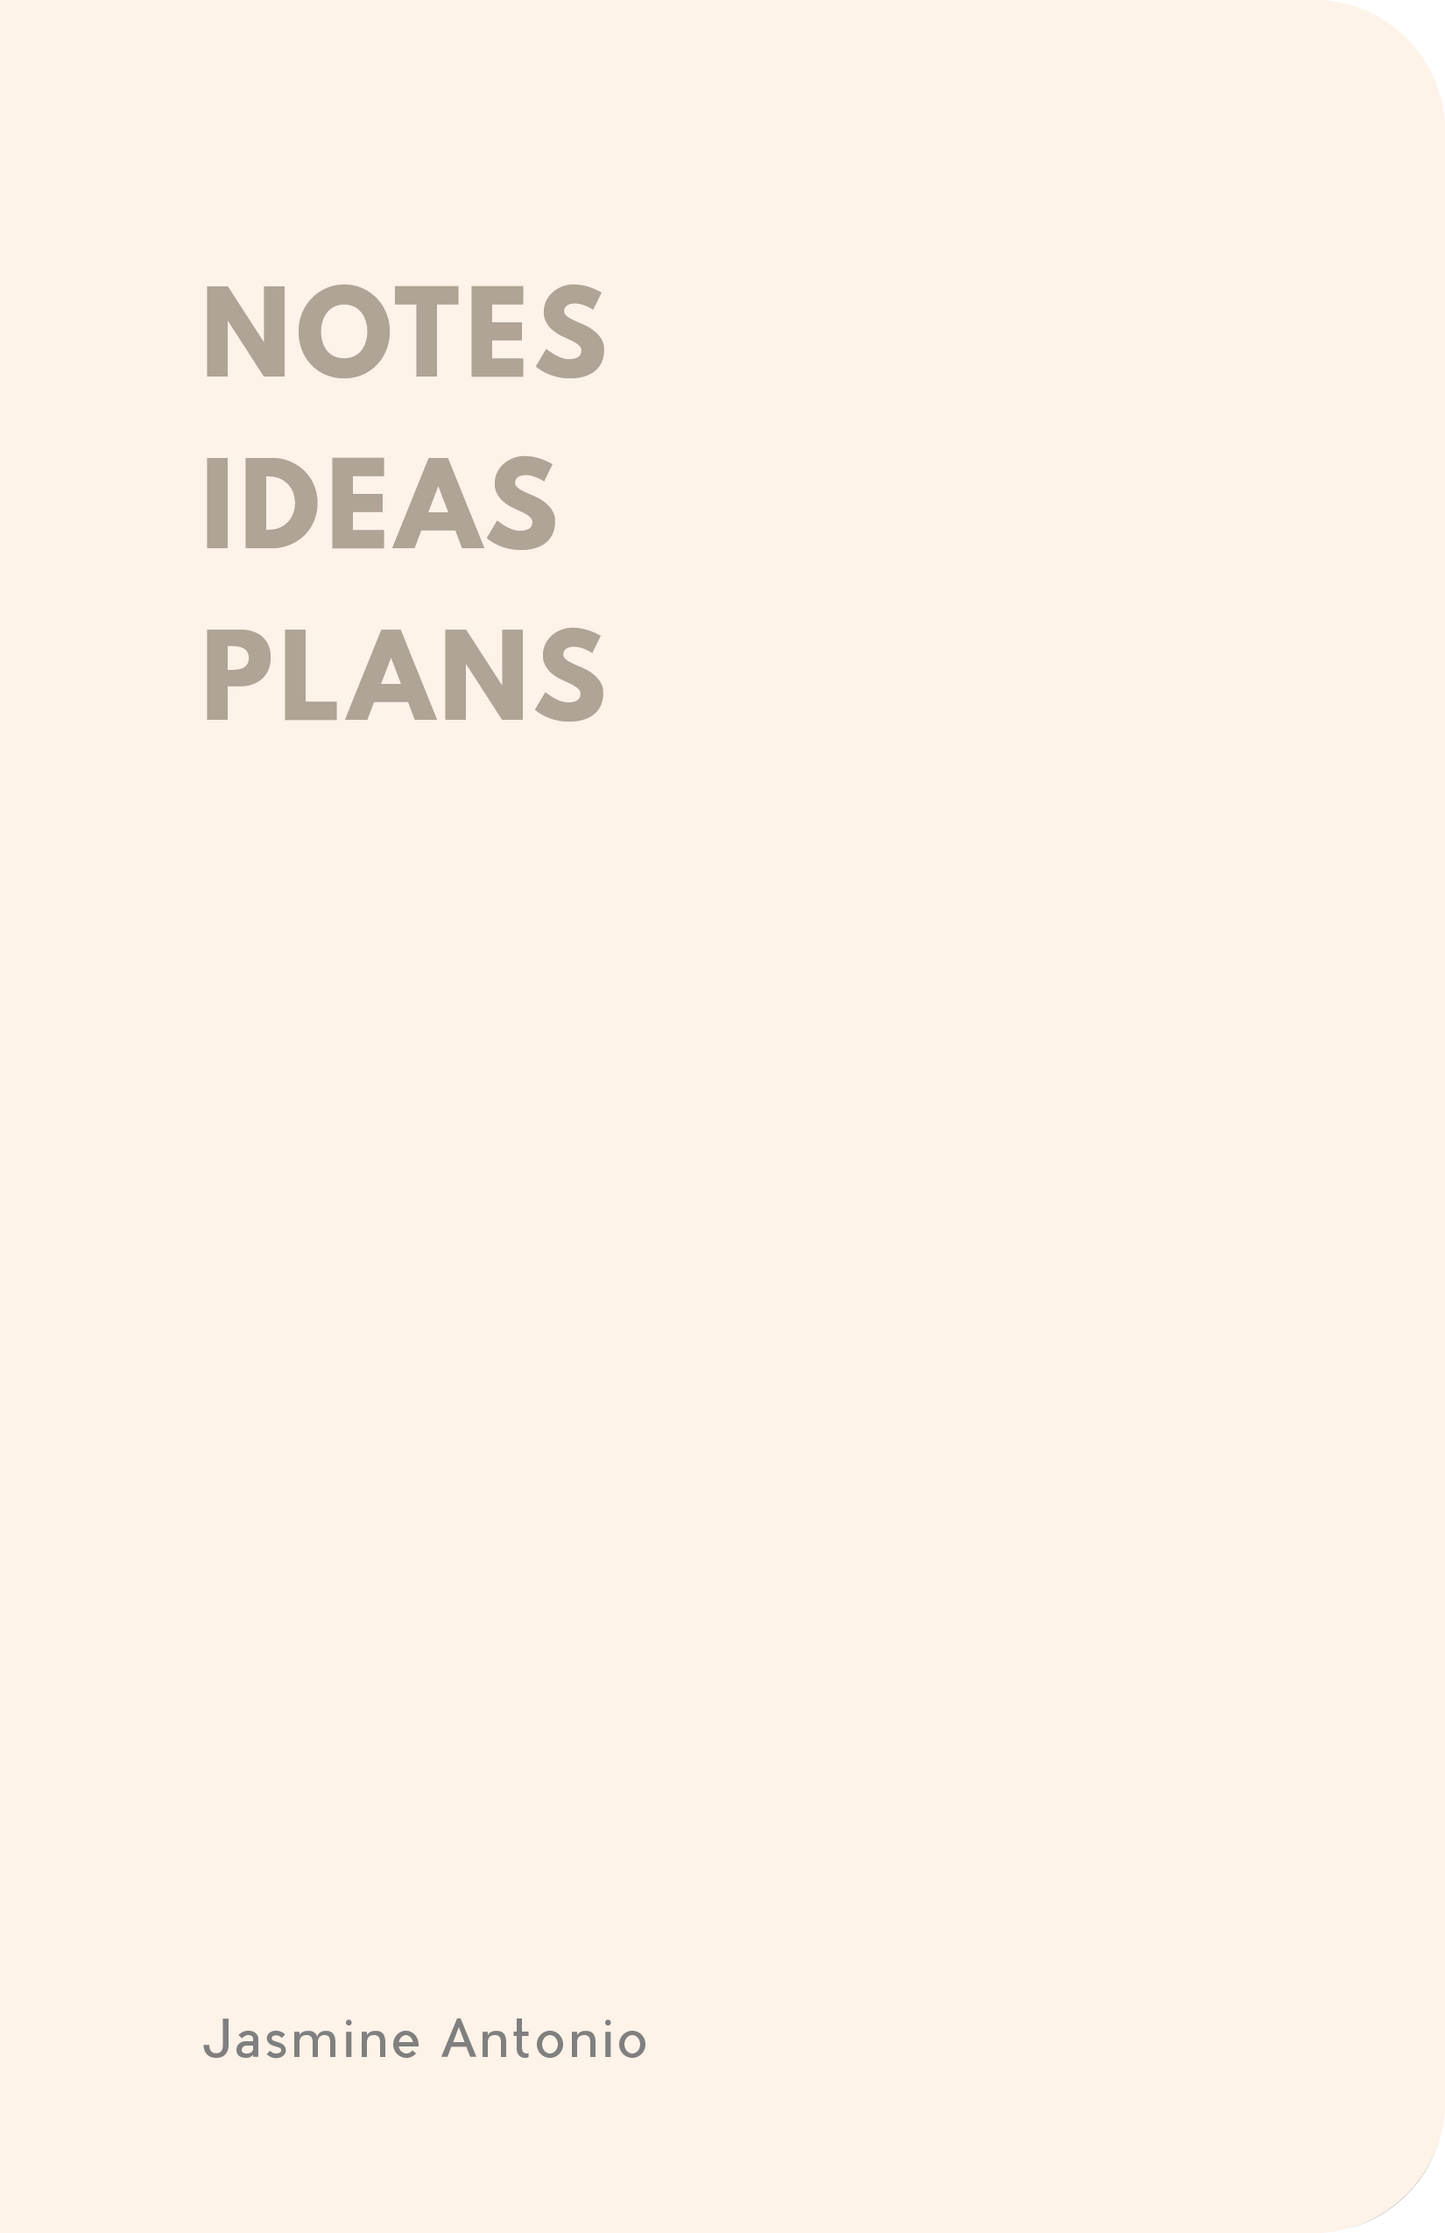 Notes Plans Ideas Notebook